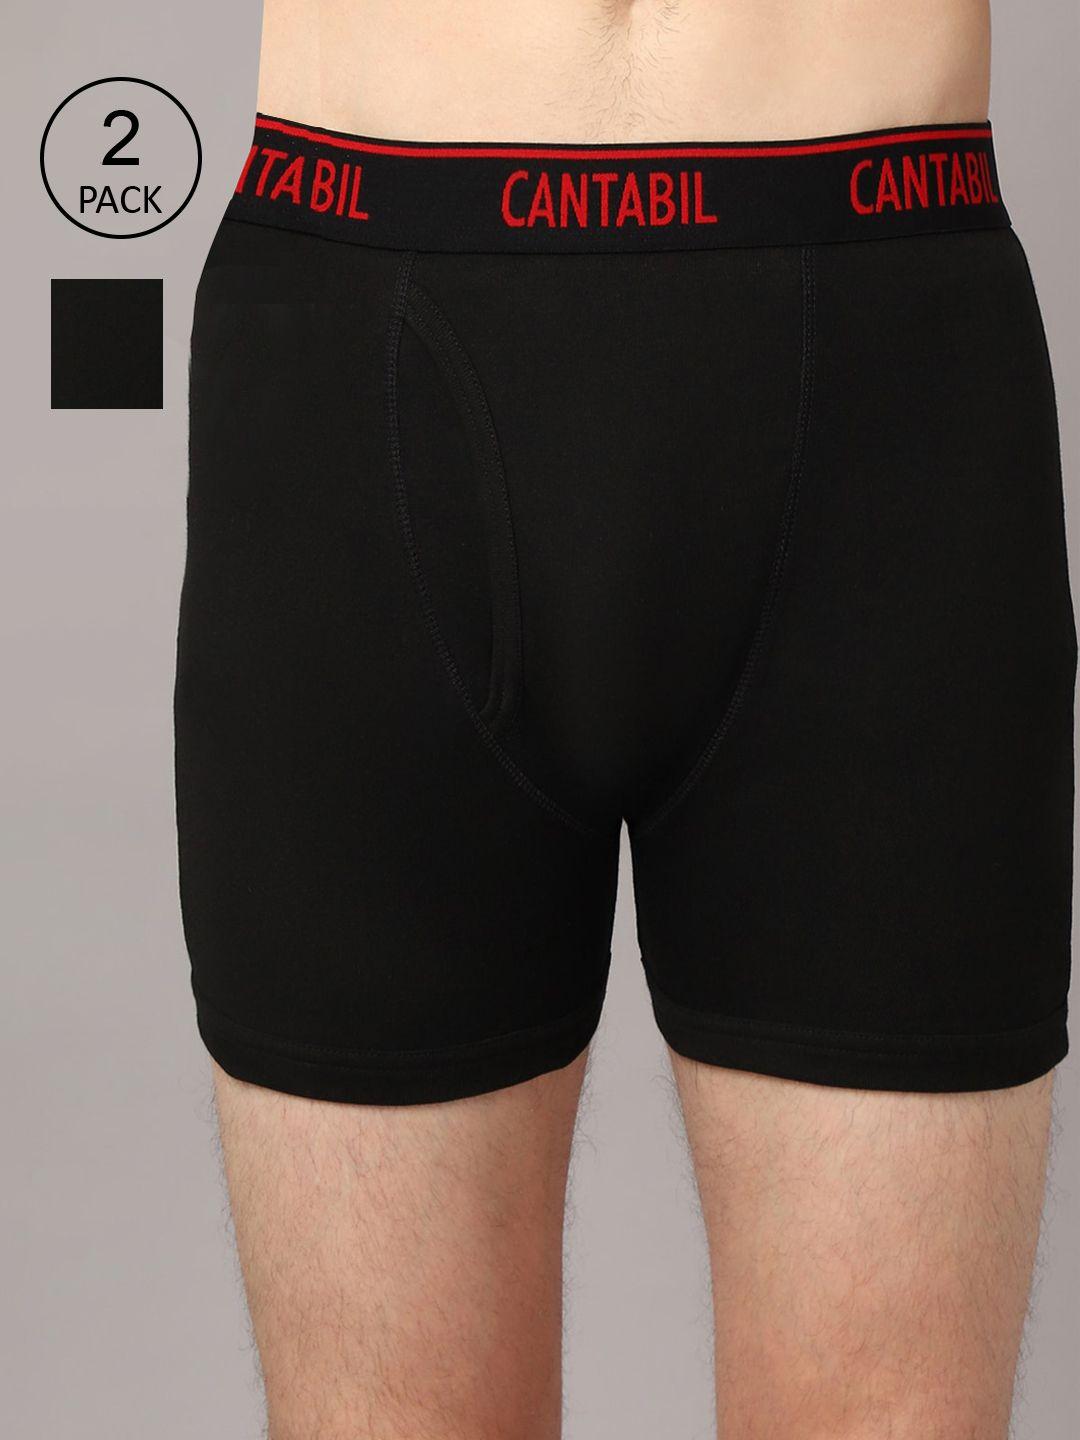 cantabil men pack of 2 black solid cotton basic briefs